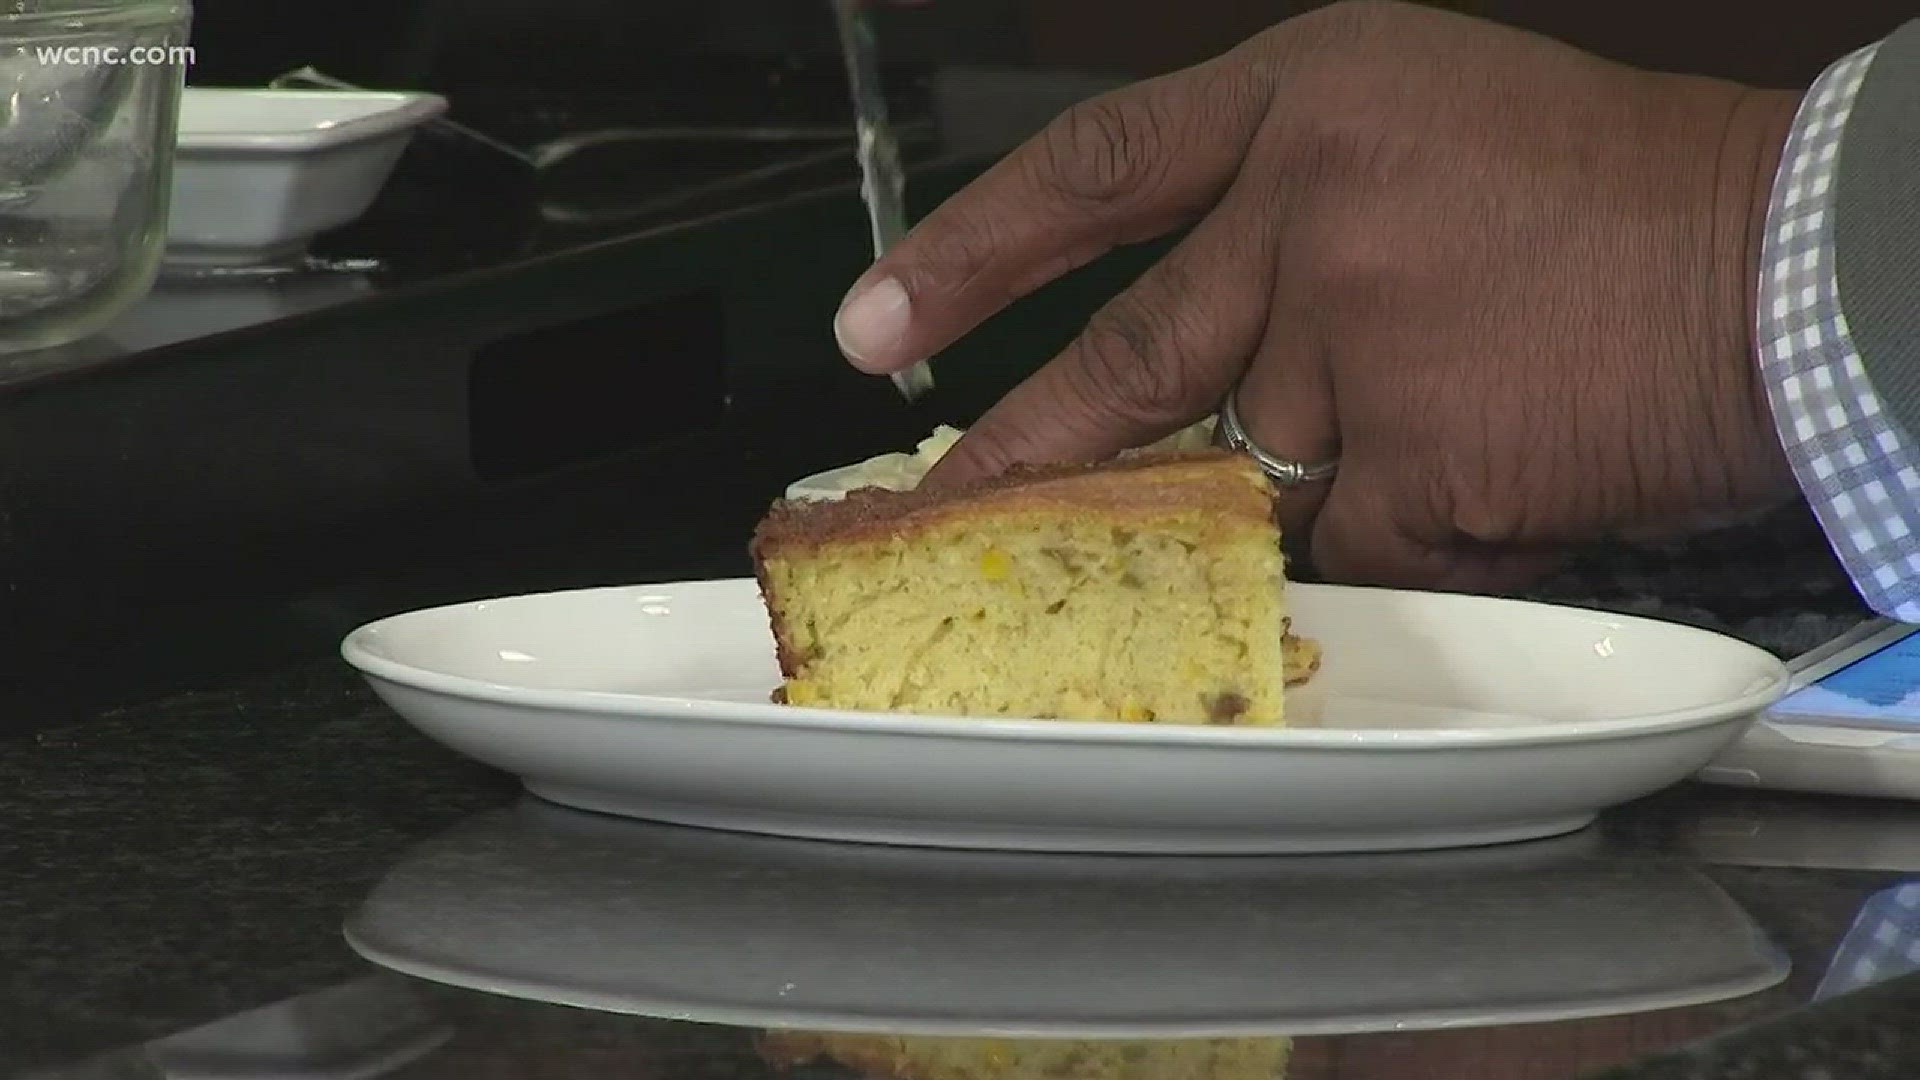 Julie Busha says all it takes is one ingredient to transform your typical cornbread recipe.